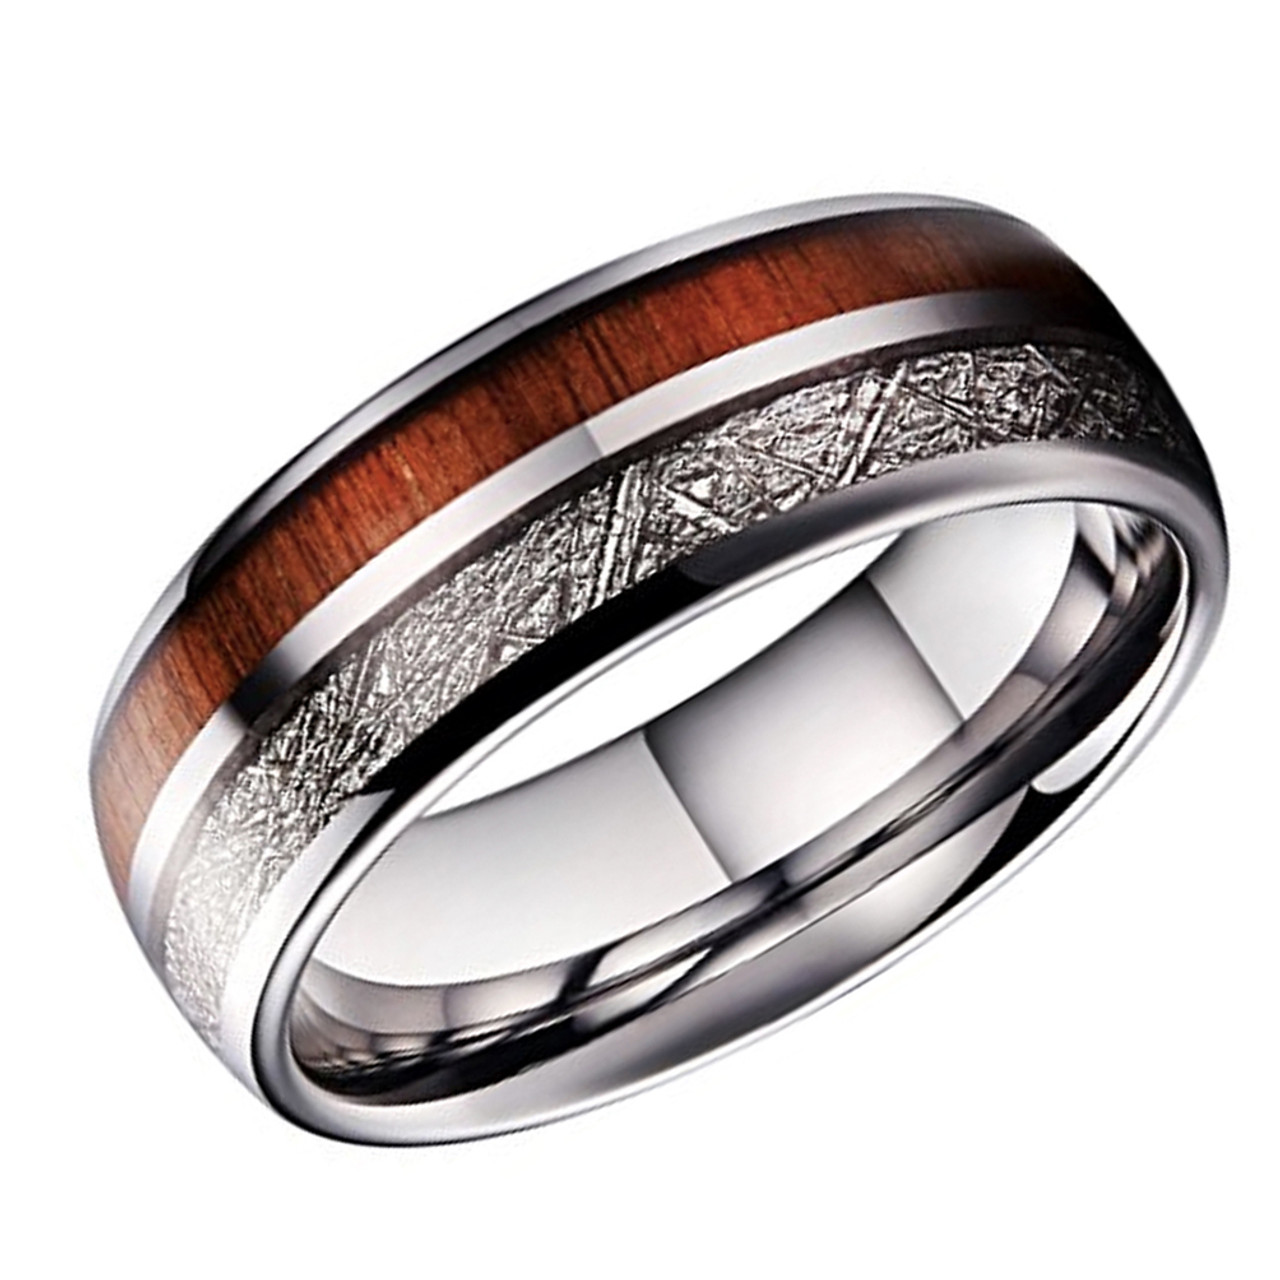 (8mm) Unisex, Women's or Men's Tungsten Carbide Wedding ring band. Domed Tungsten carbide Ring with Brown Wood and Inspired Meteorite Inlay Ring